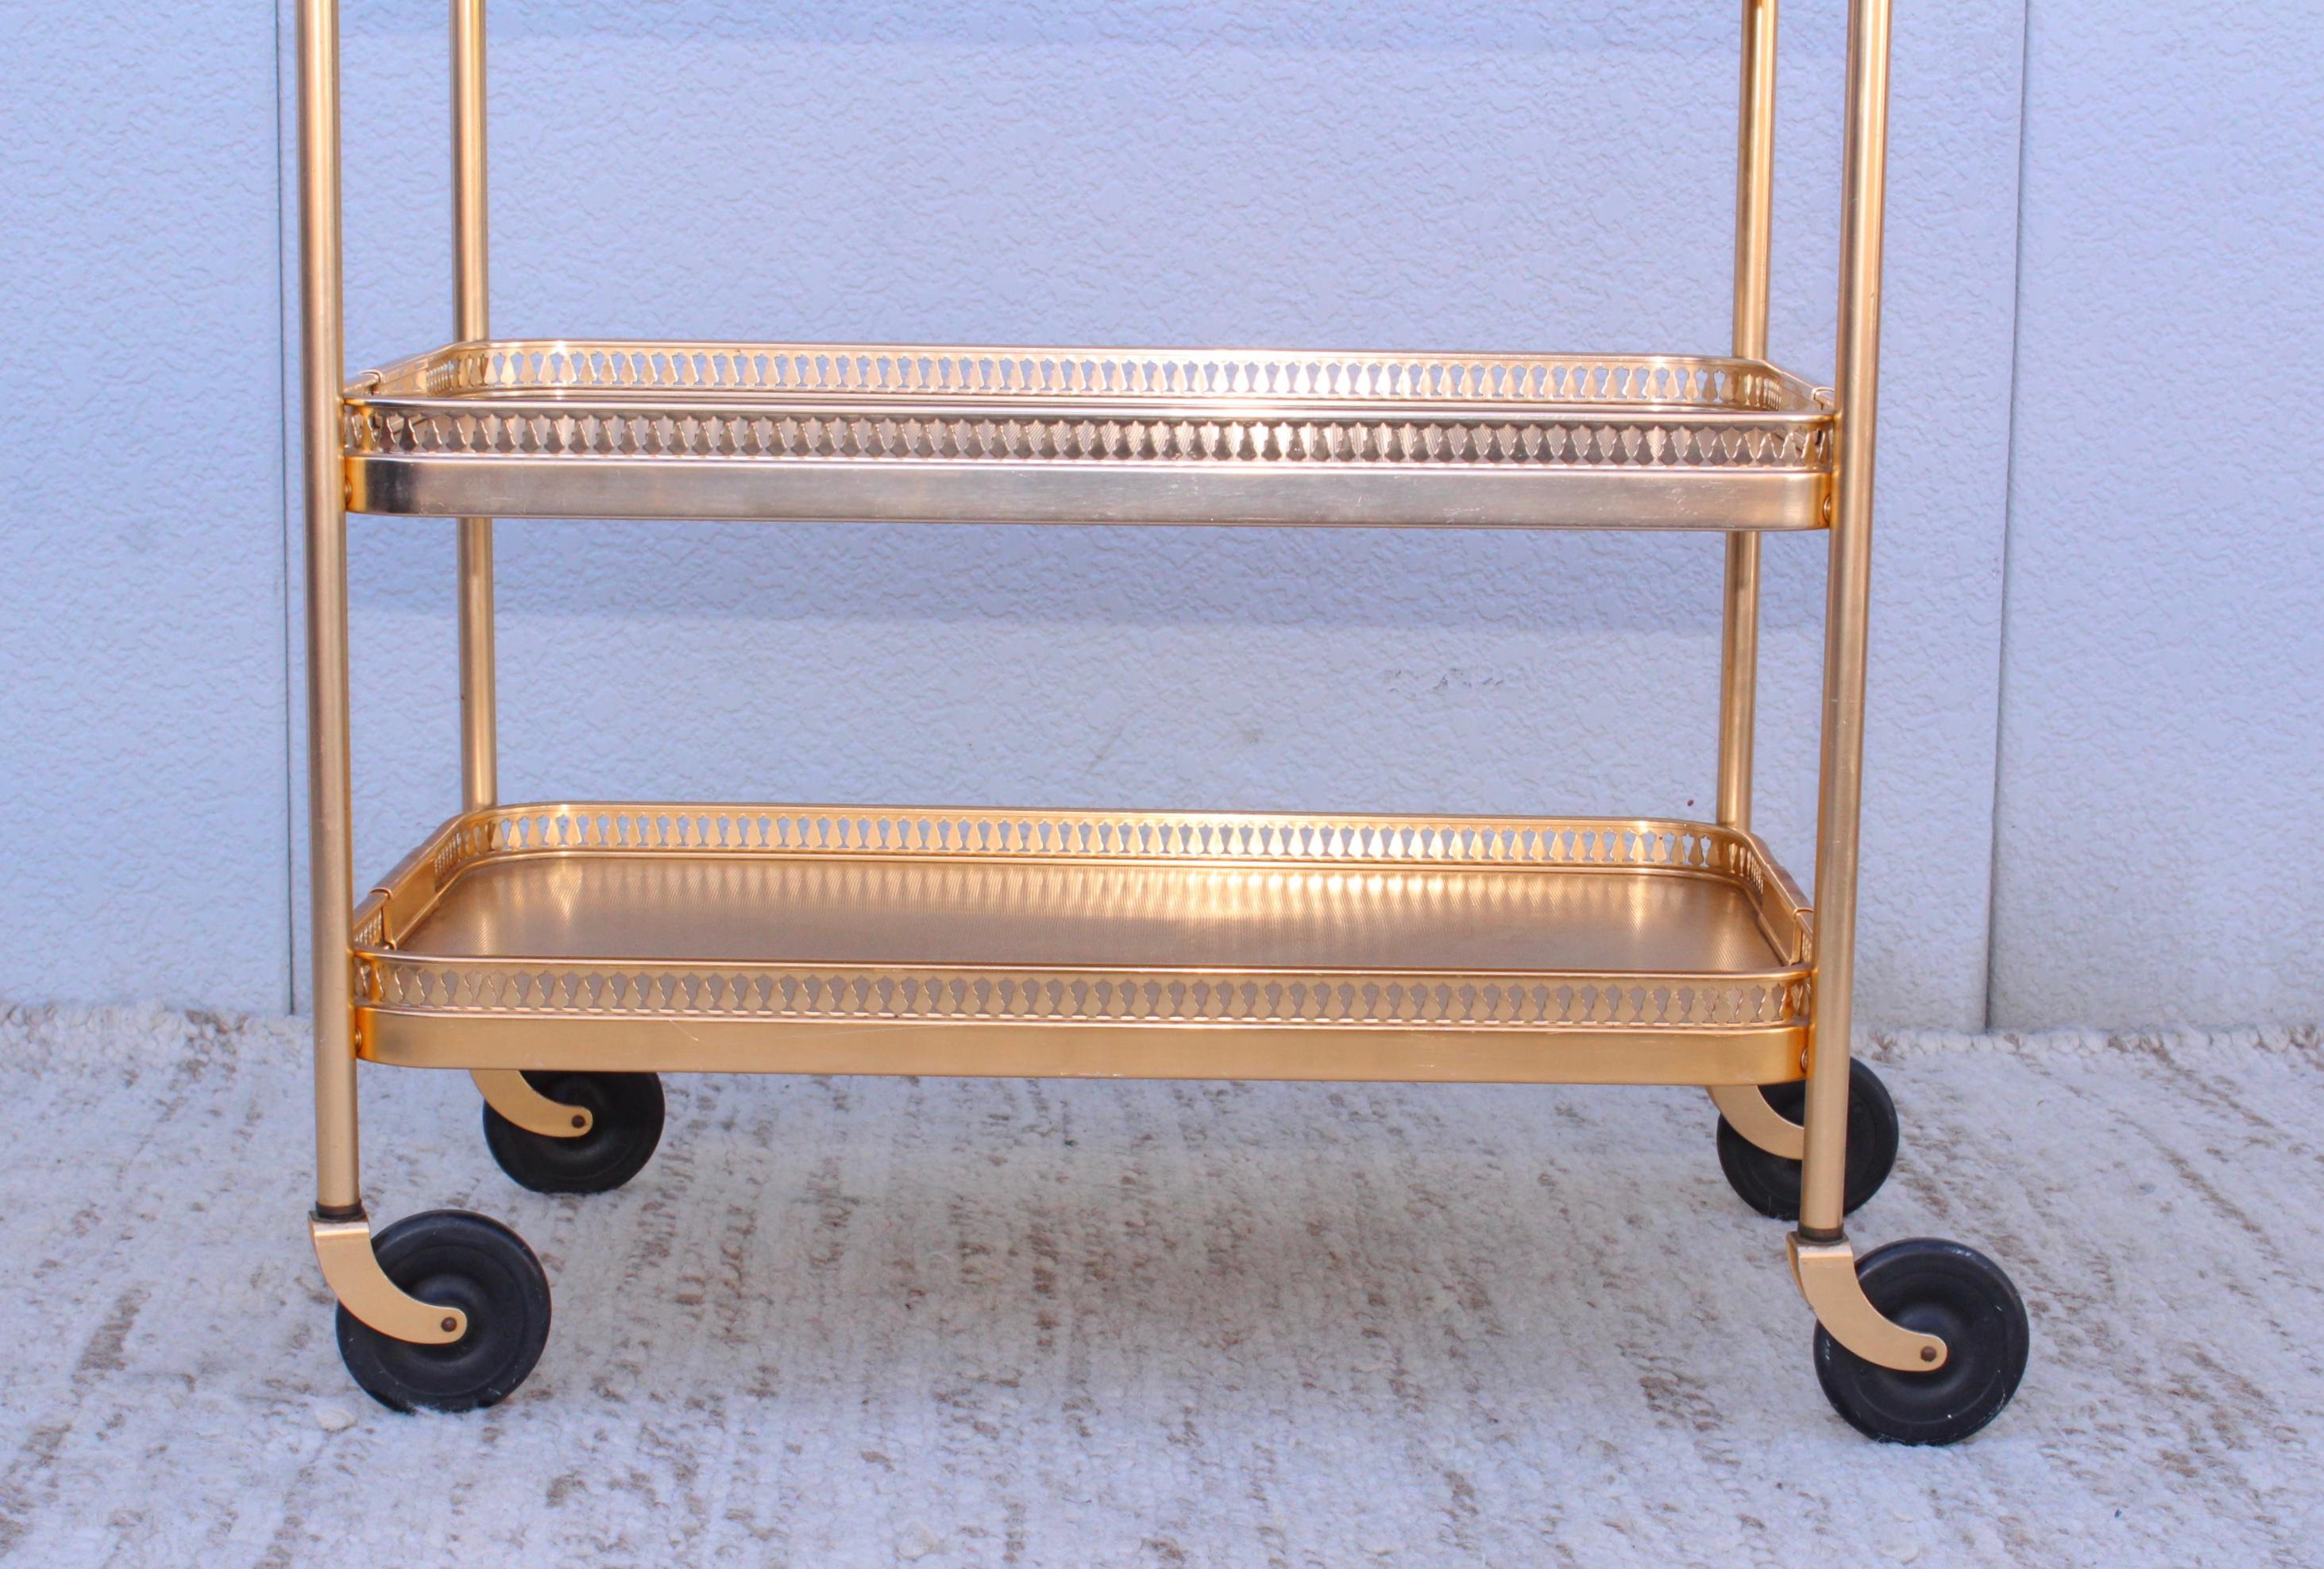 1960's Mid-Century Modern 3 Tier Bar Cart from England by Kaymet 1